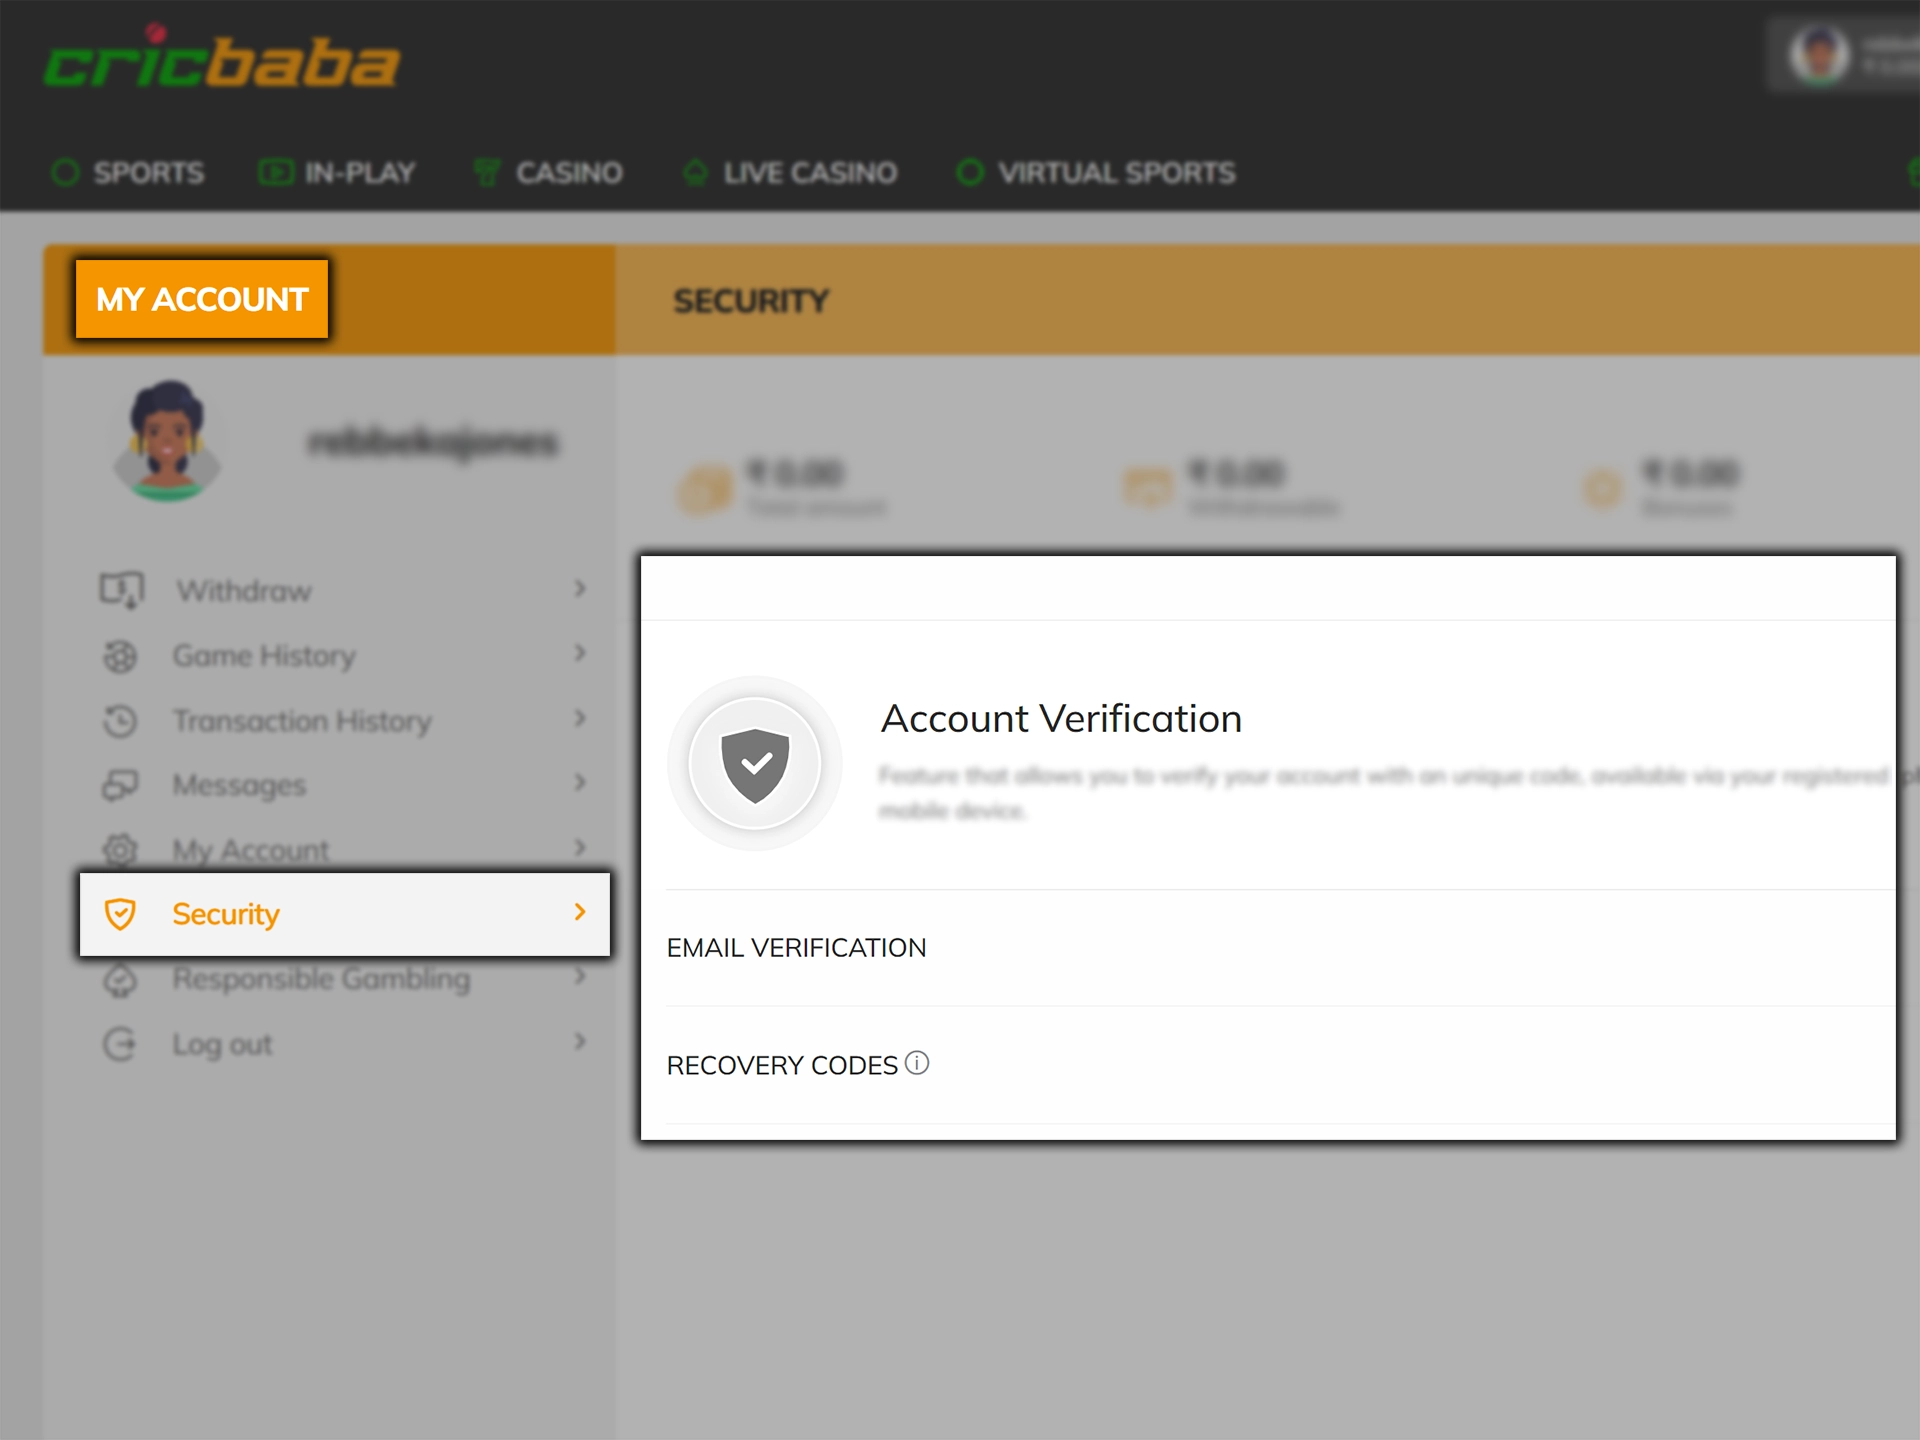 Provide identification documents to verify your Cricbaba account.